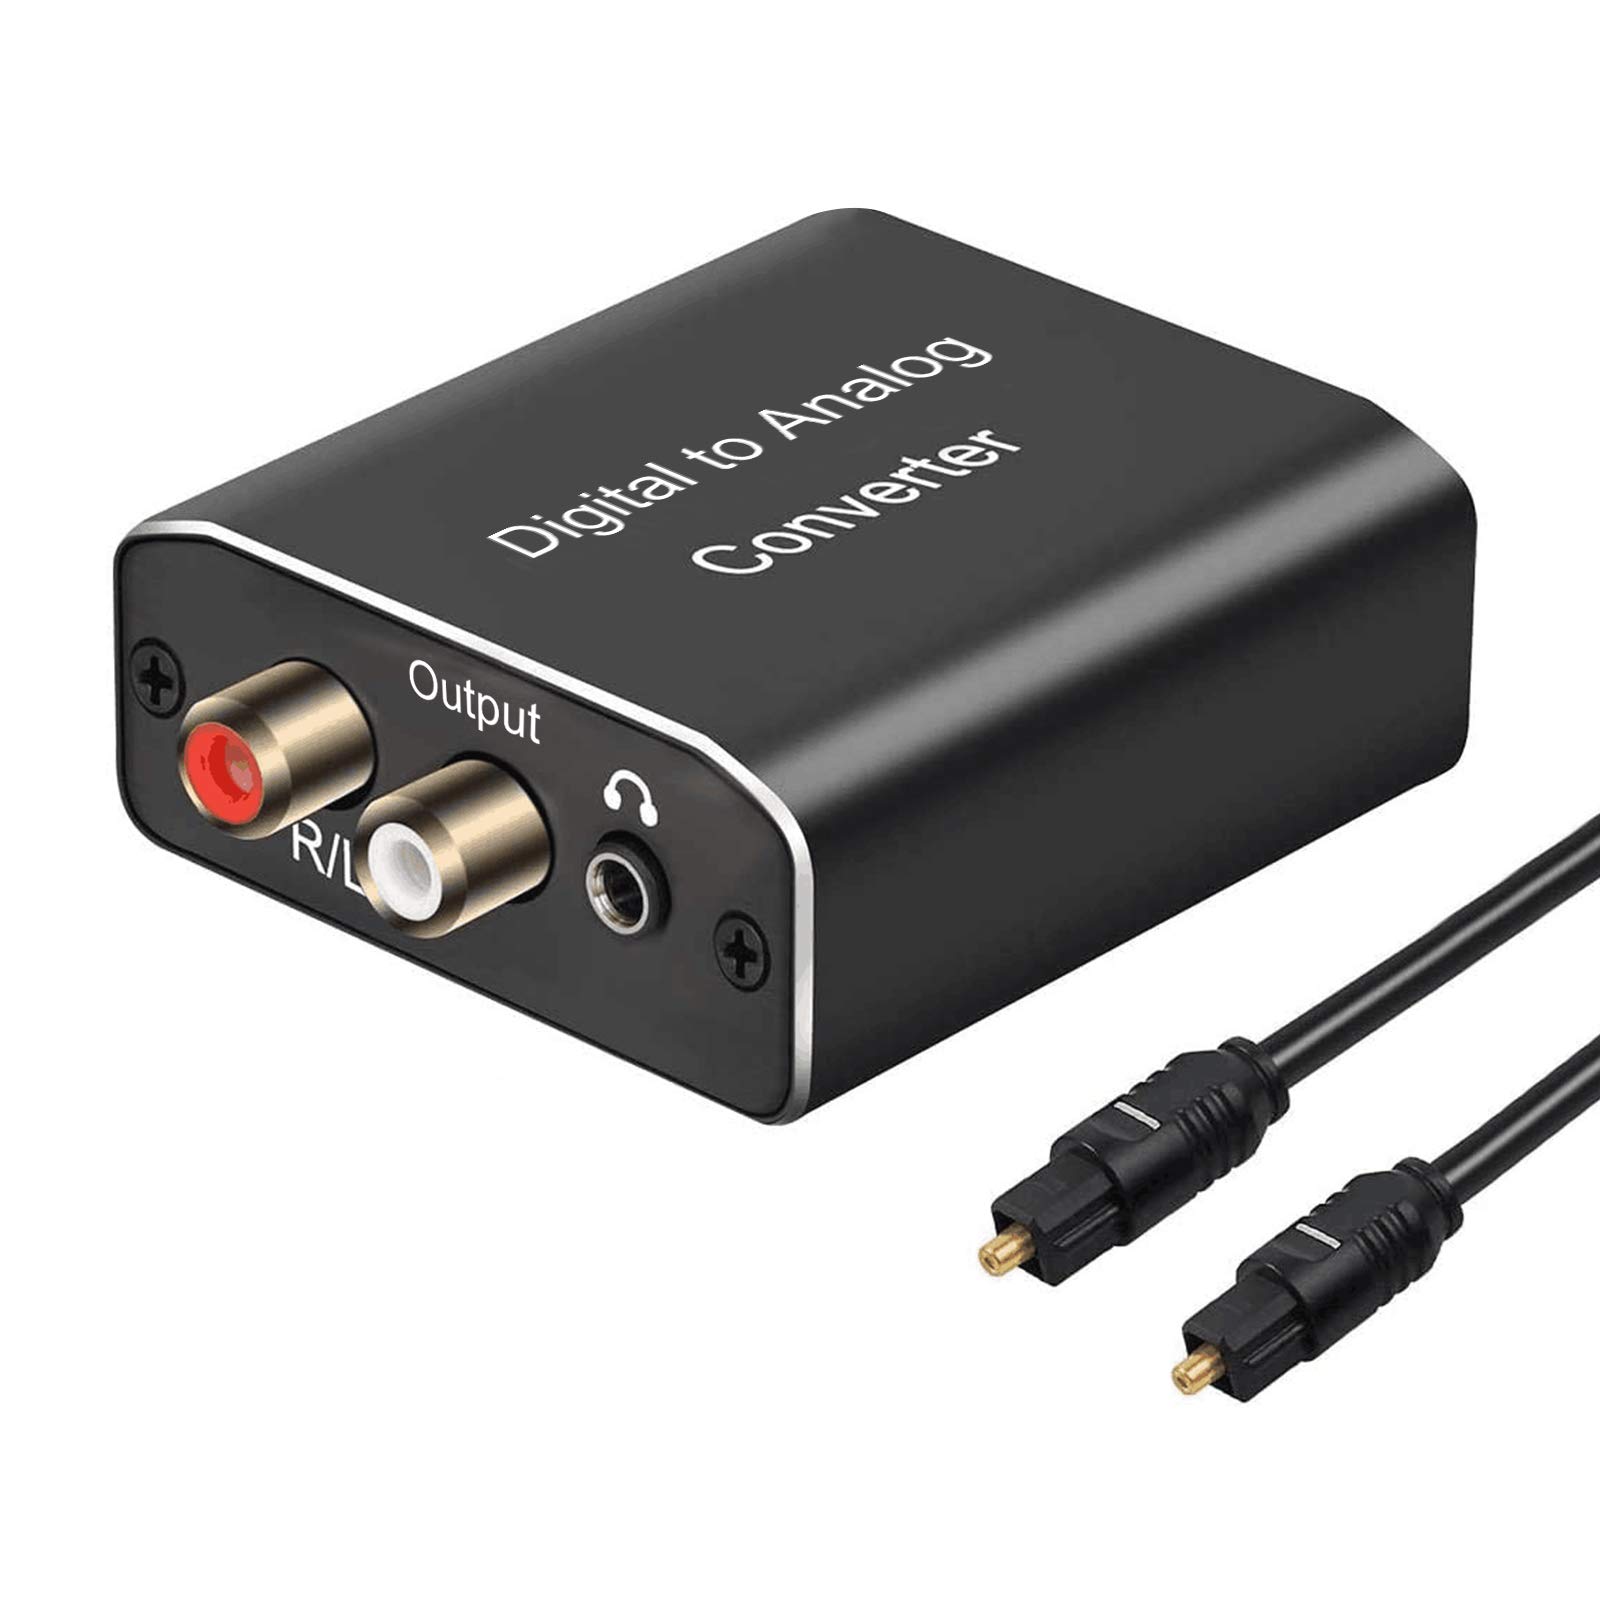 Musou 192KHz Digital Coaxial Toslink Spdif Optical to R/L and 3.5mm Jack Audio